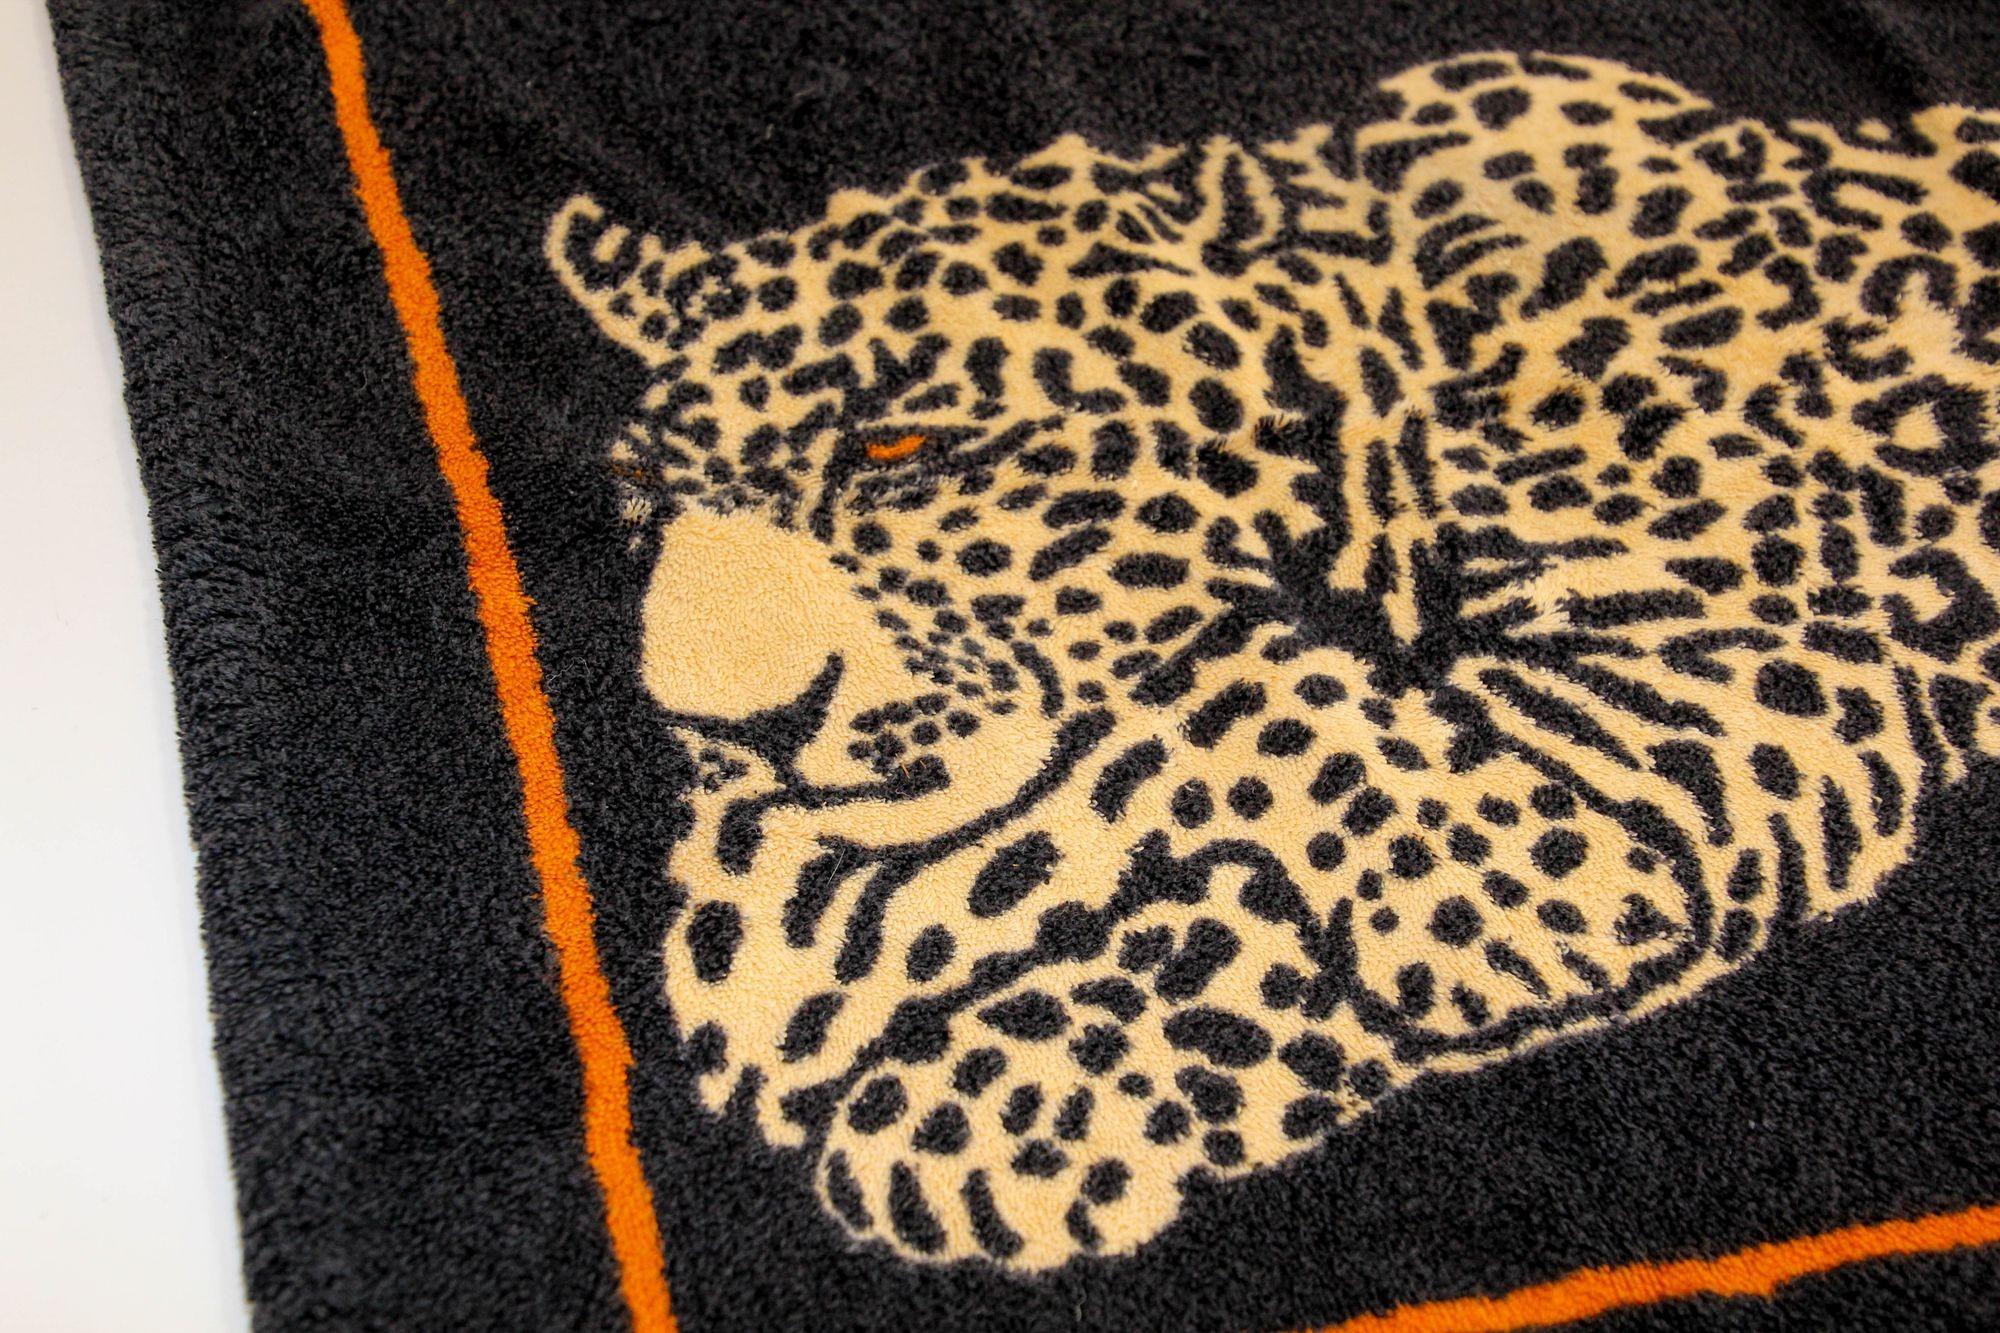 Hermes Paris Small Bath Mat with a Leopard Print in Black and Orange 1